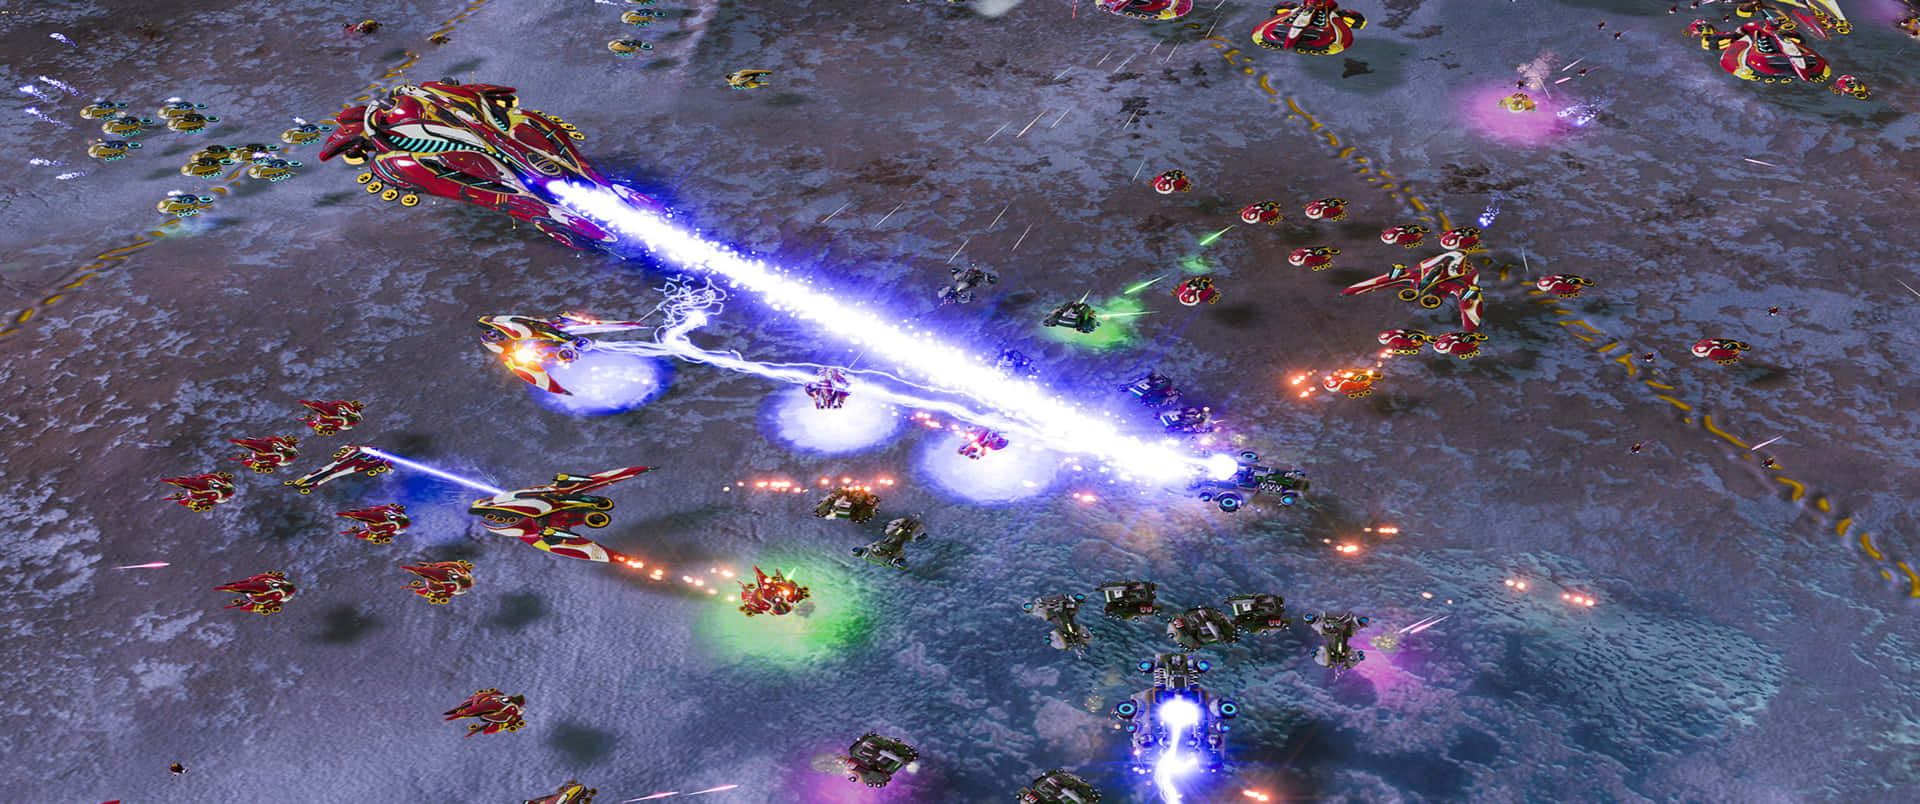 Experience the real-time strategy game "Ashes of the Singularity: Escalation" on your 1440p display